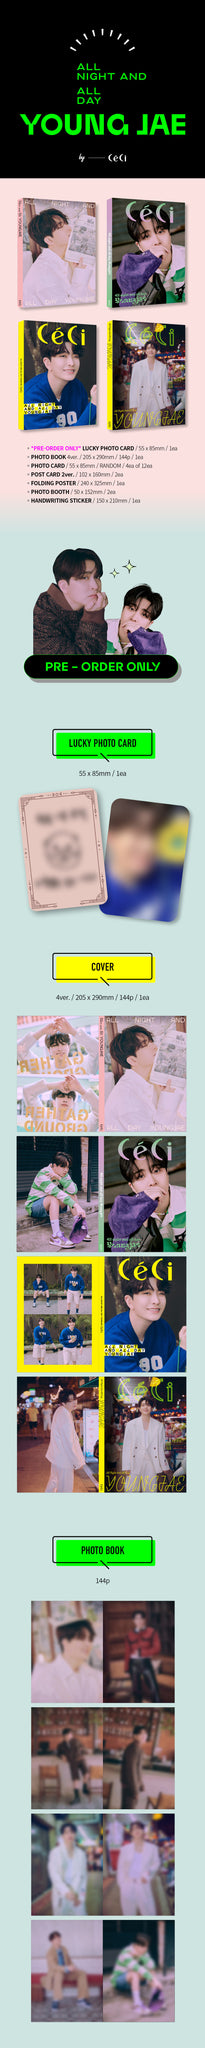 GOT7 YOUNGJAE Photobook – [ ALL NIGHT AND ALL DAY ] (A ver.)